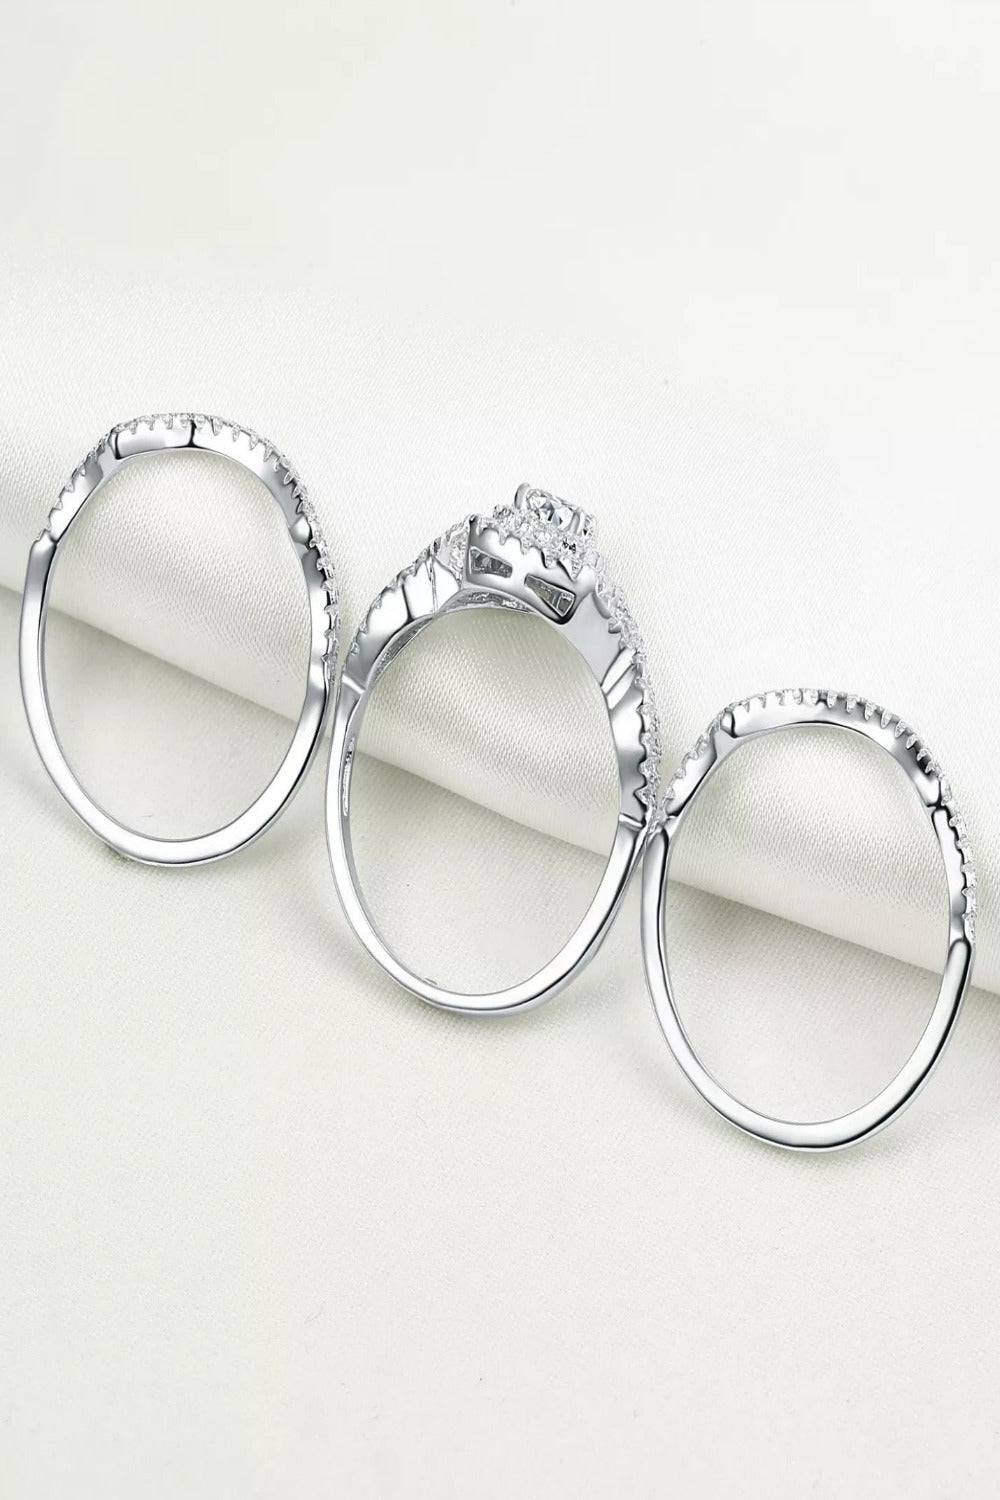 3 Pc Round Cut Sterling Silver Ring Set - TGC Boutique - Engagement Ring Set